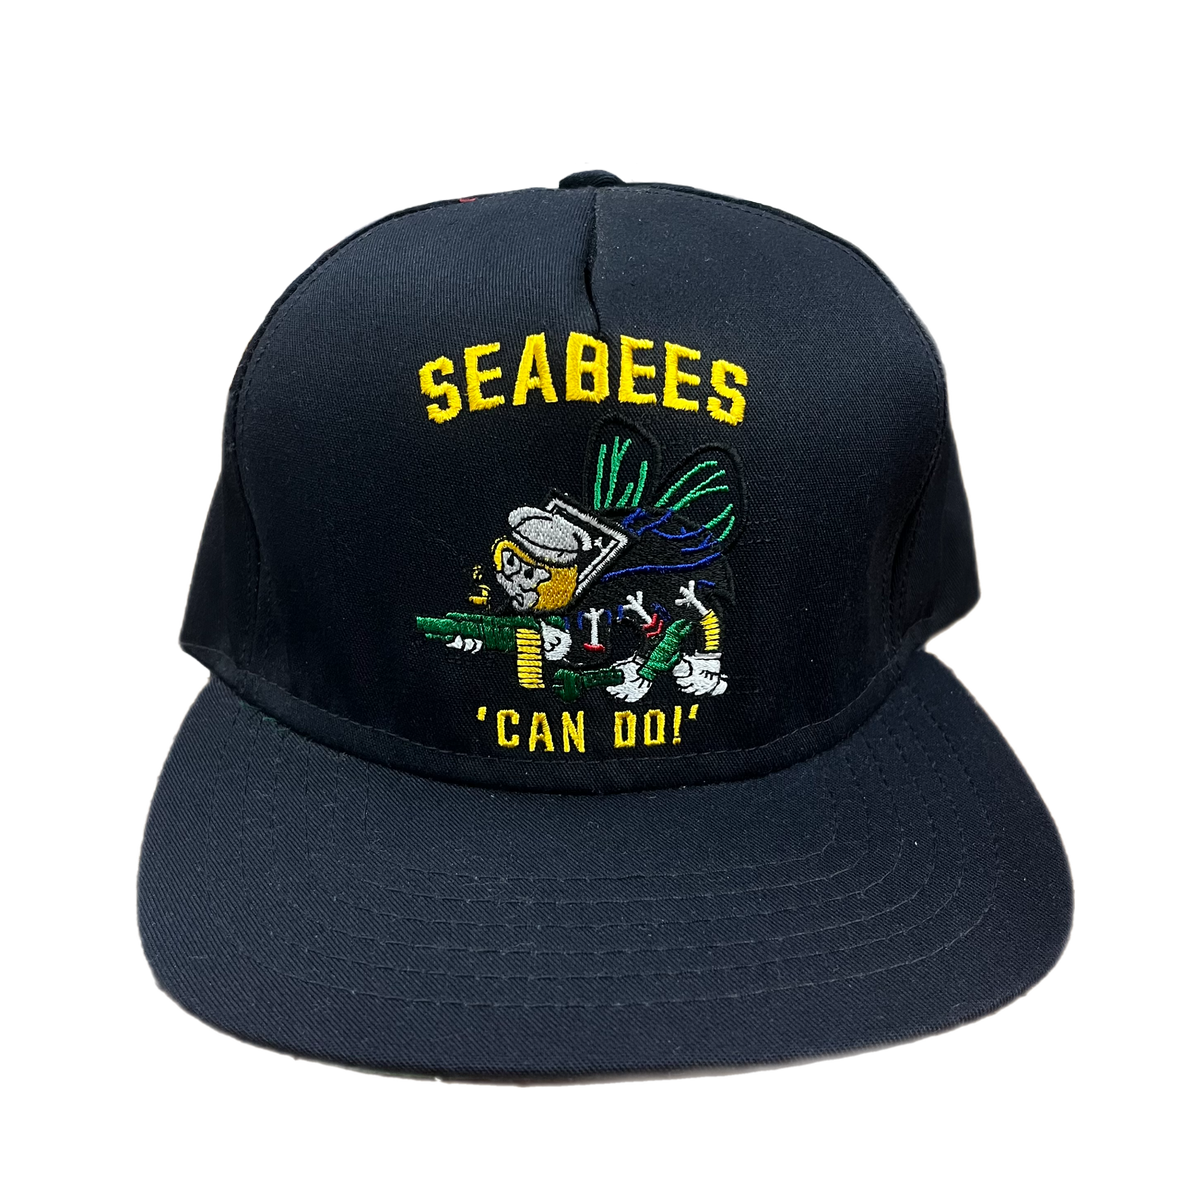 Vintage U.S. Navy Seabees &quot;Can Do!&quot; Snapback